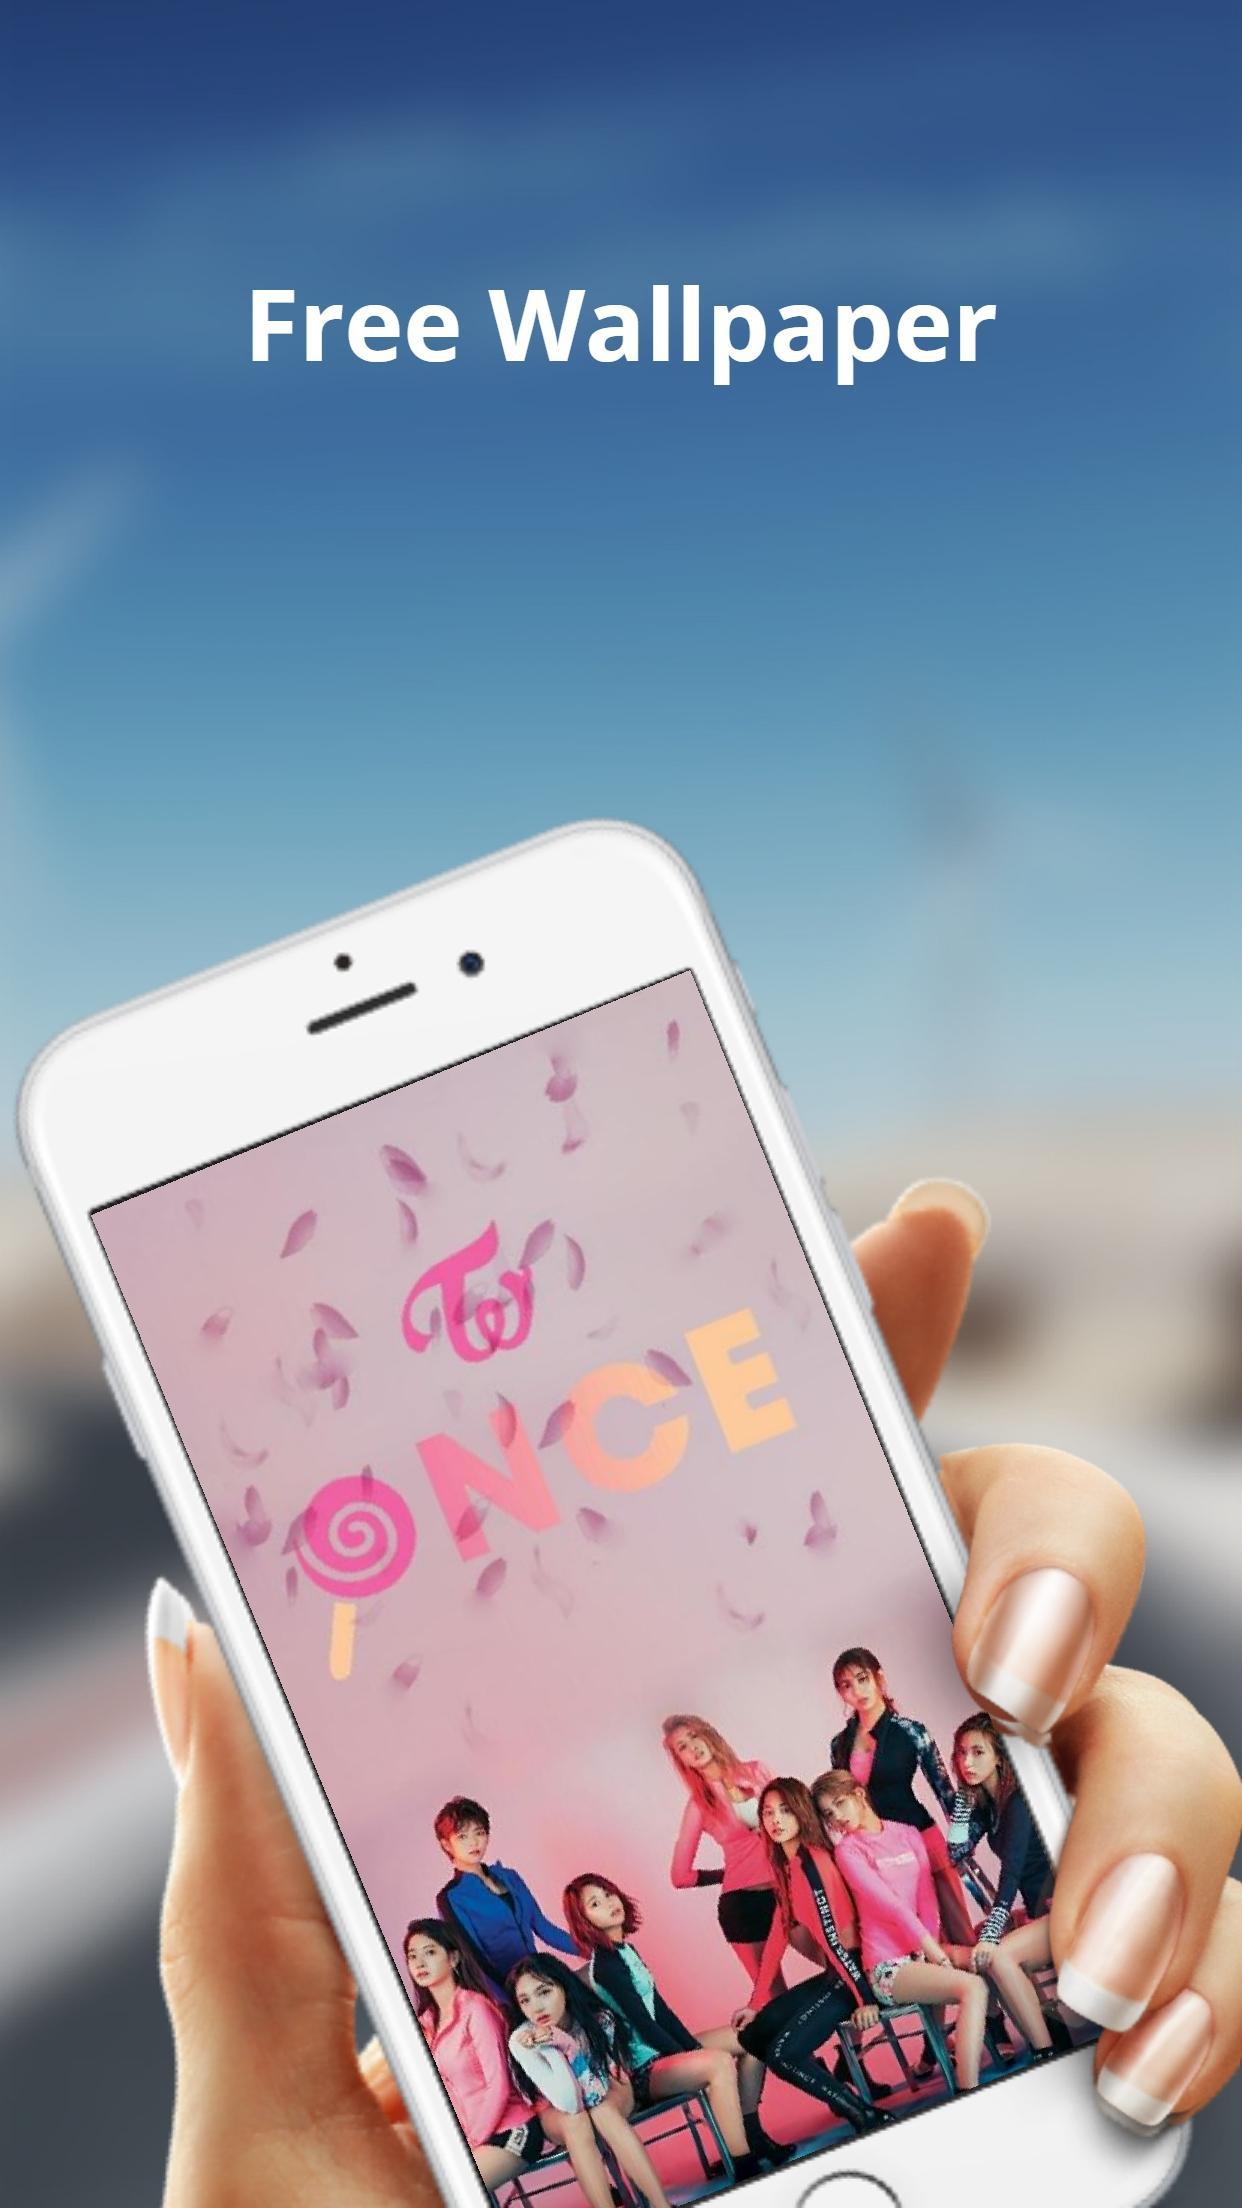 Twice Wallpapers Kpop Fans Hd Locksreen Background For Android Apk Download